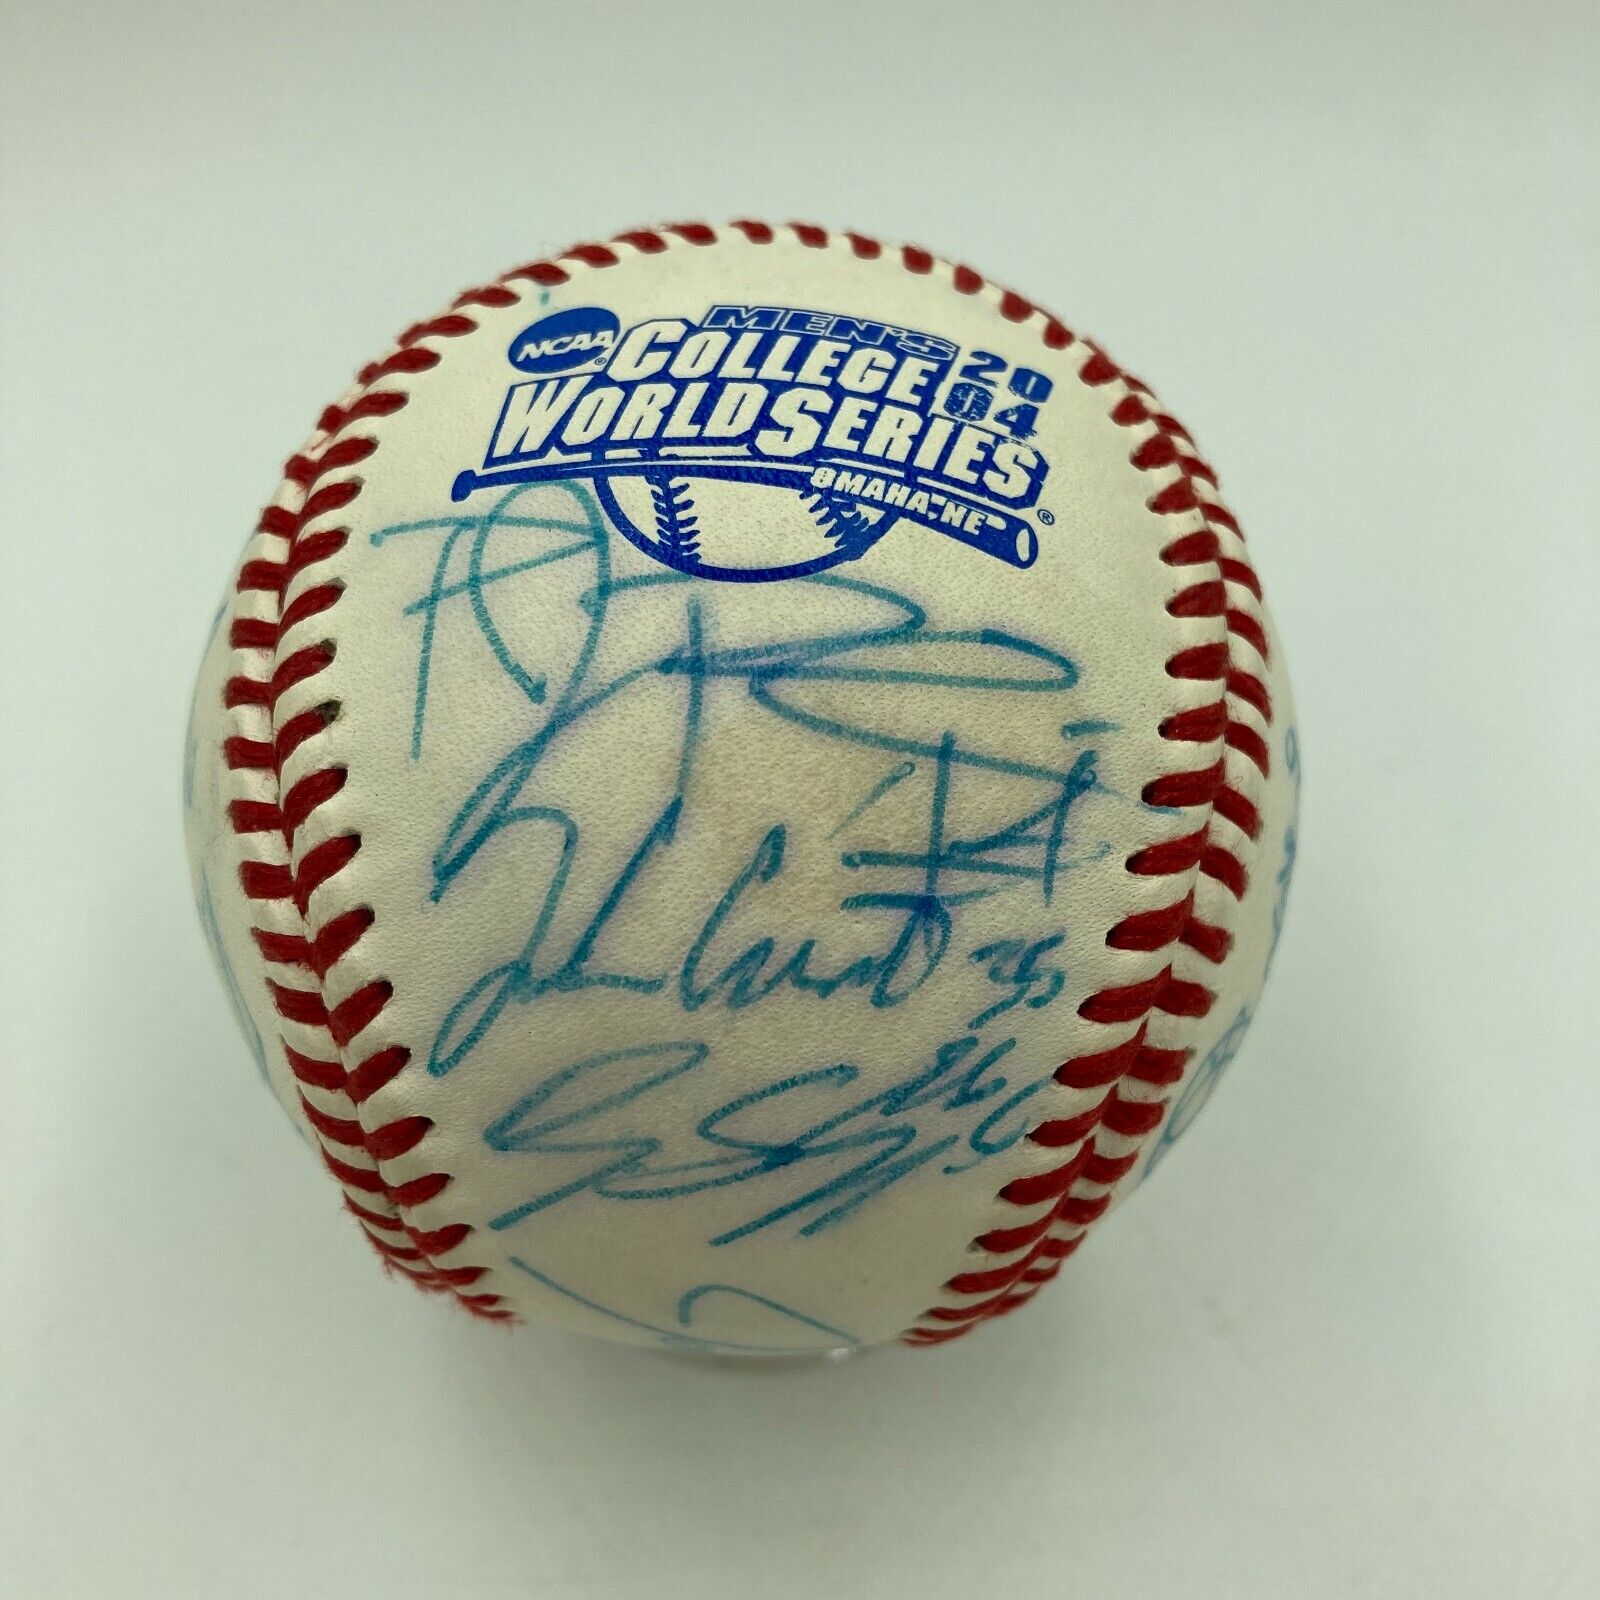 67% OFF of fixed price 2004 Cal State Fullerton NCAA Champs Team Ba shop Signed World Series